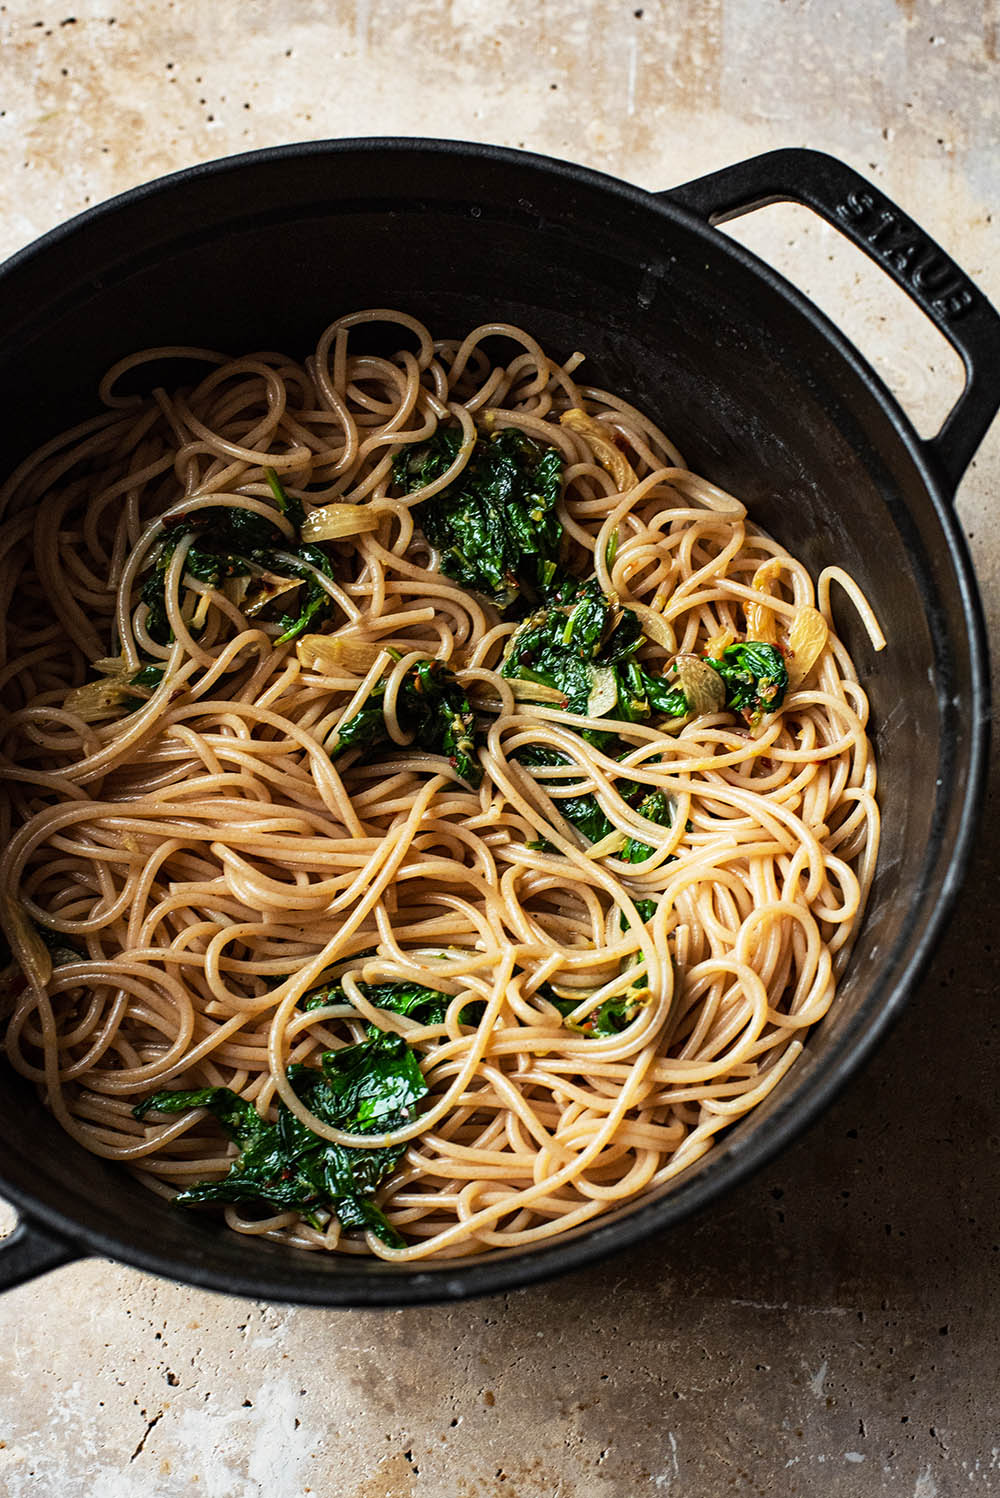 Pasta mixed with spinach and garlic in a pot.